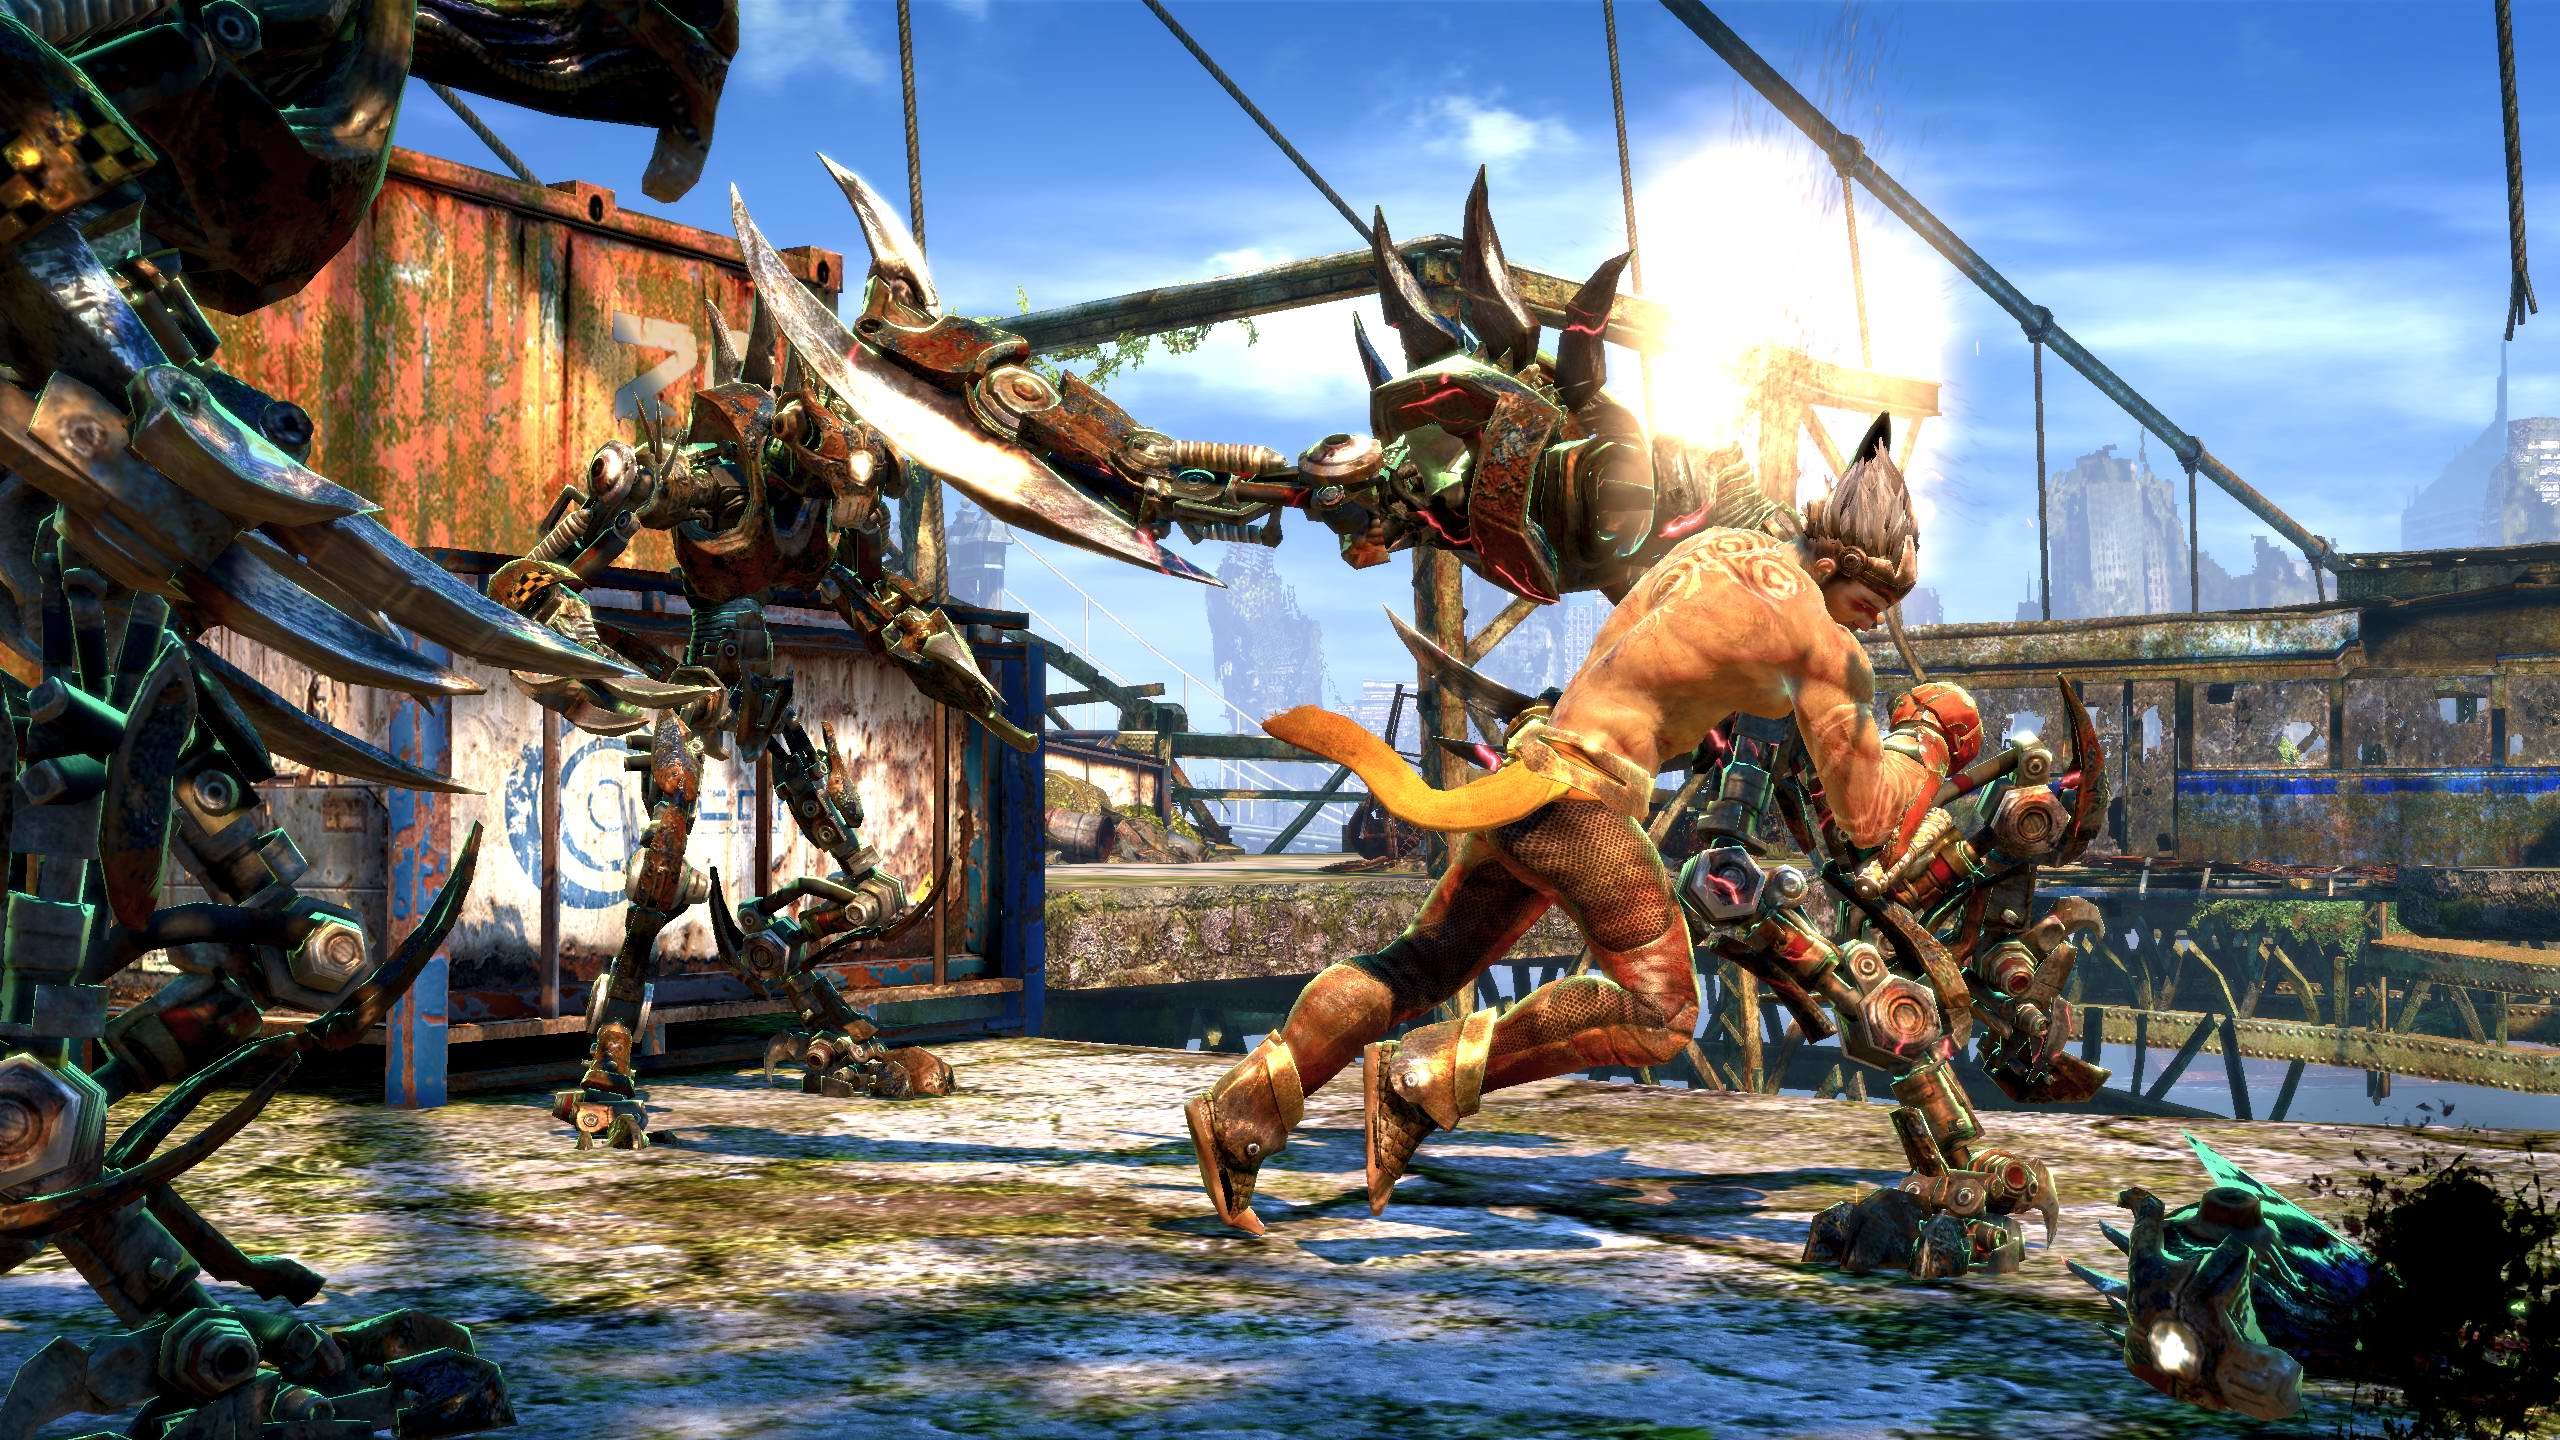 Awesome Enslaved: Odyssey To The West free wallpaper ID:363645 for hd 2560x1440 desktop